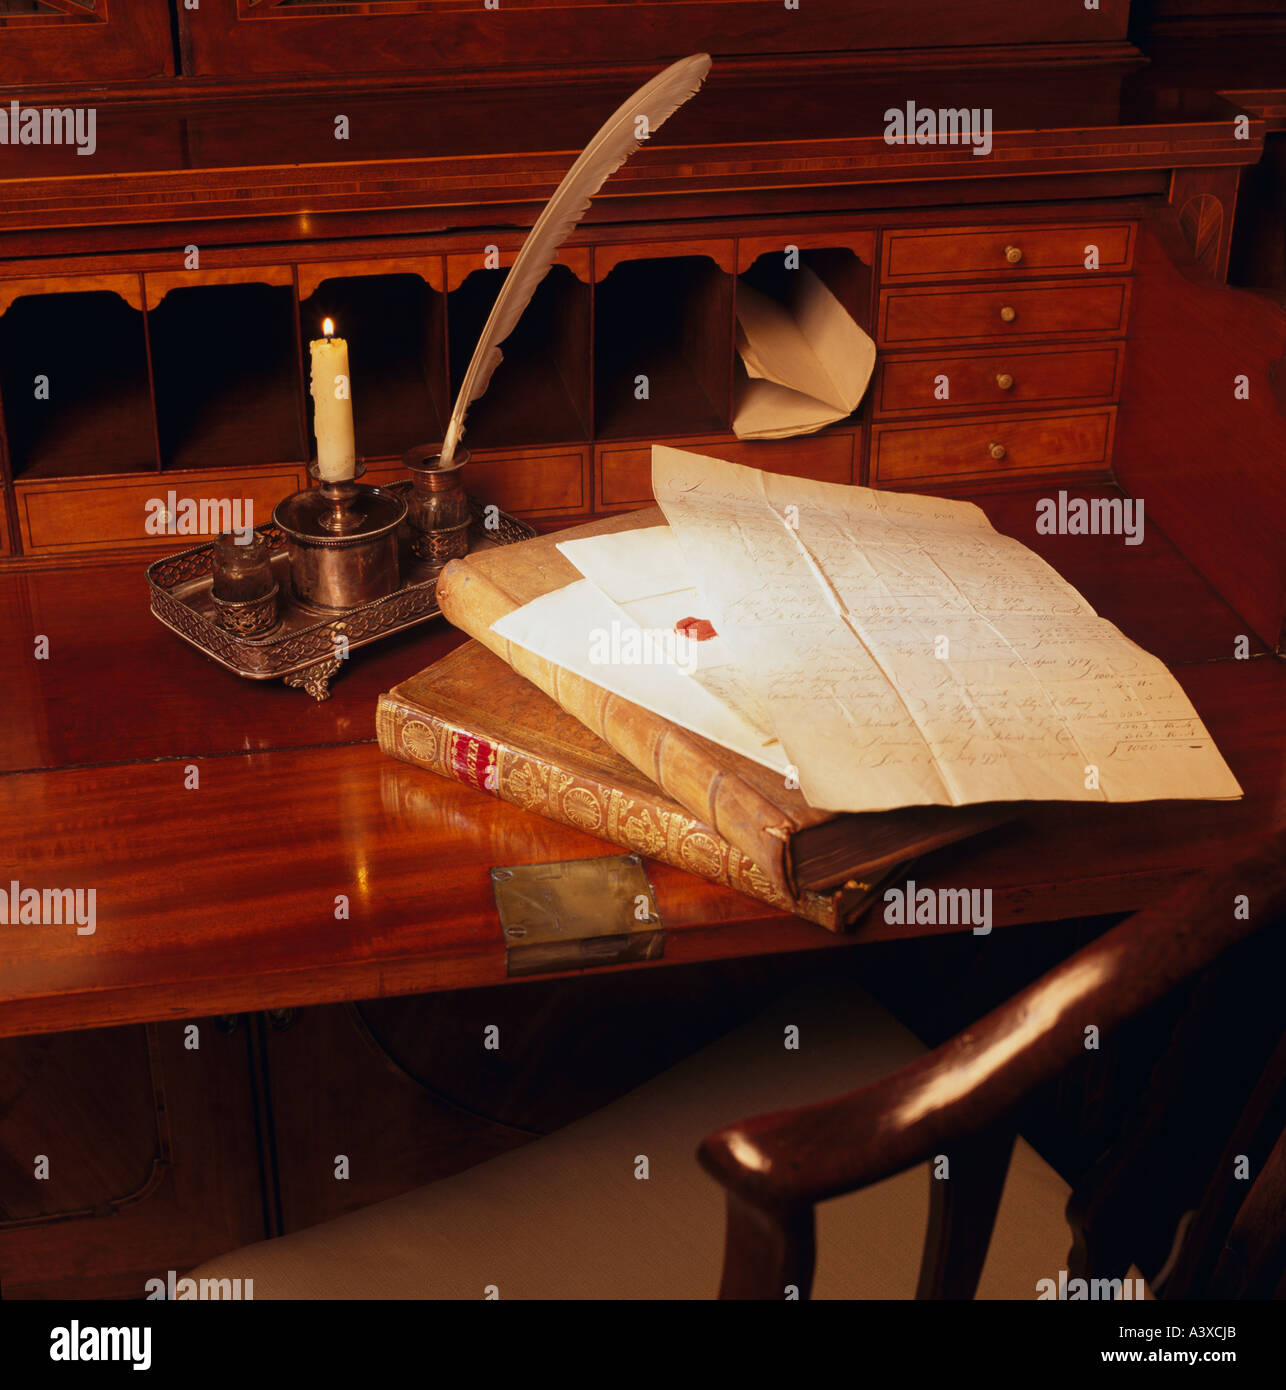 Antique desk with quill pen and papers. Stock Photo